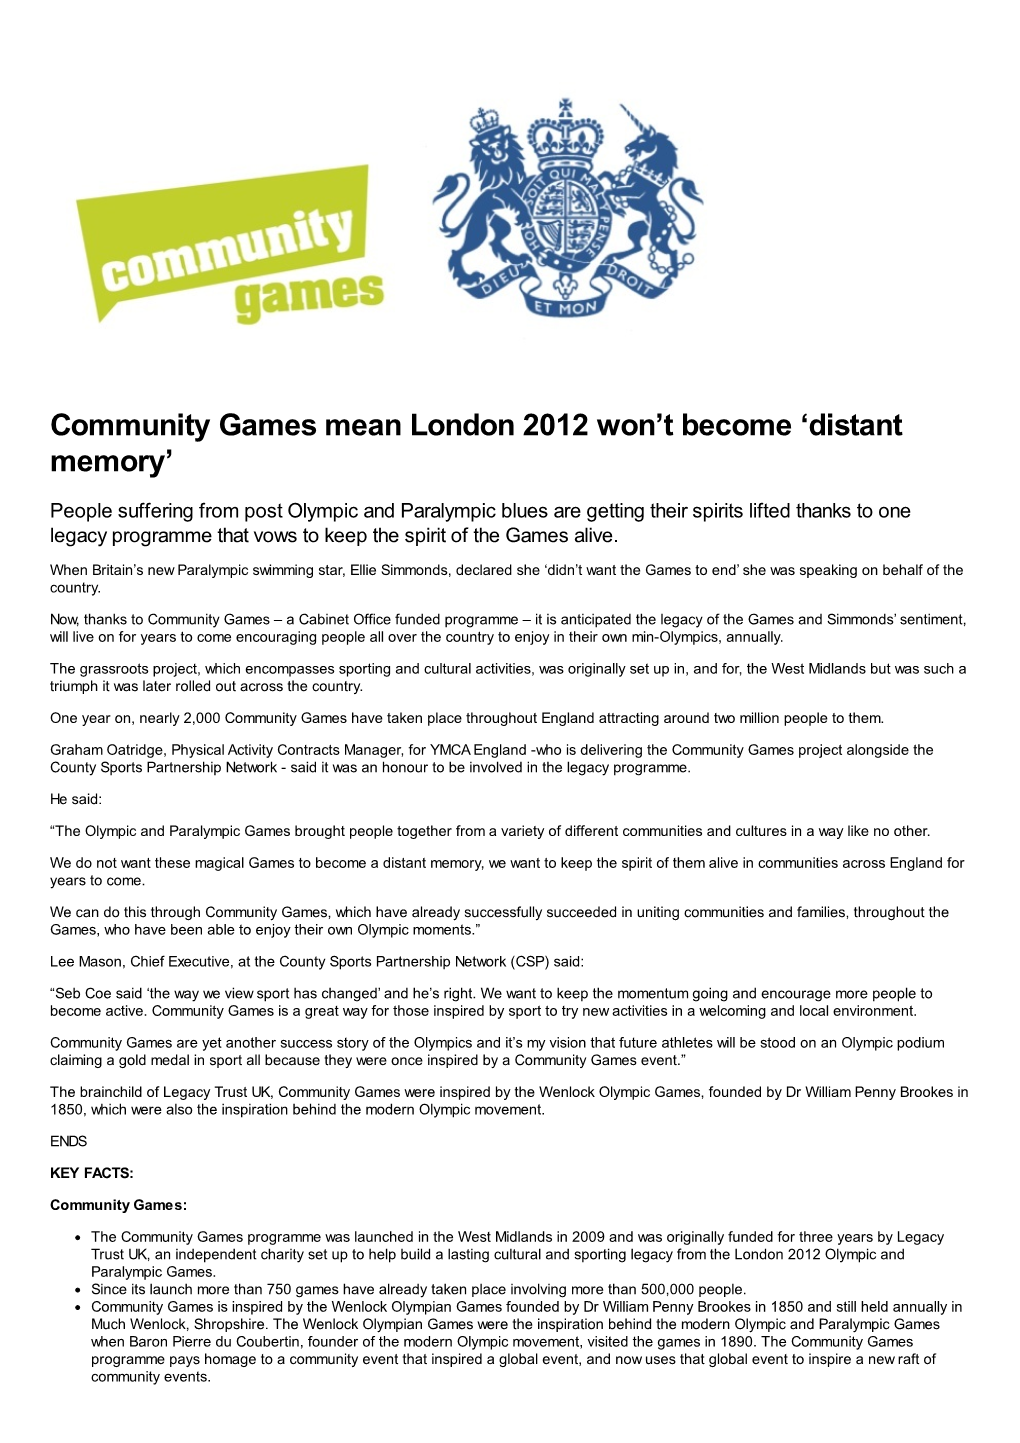 Community Games Mean London 2012 Won't Become 'Distant Memory'